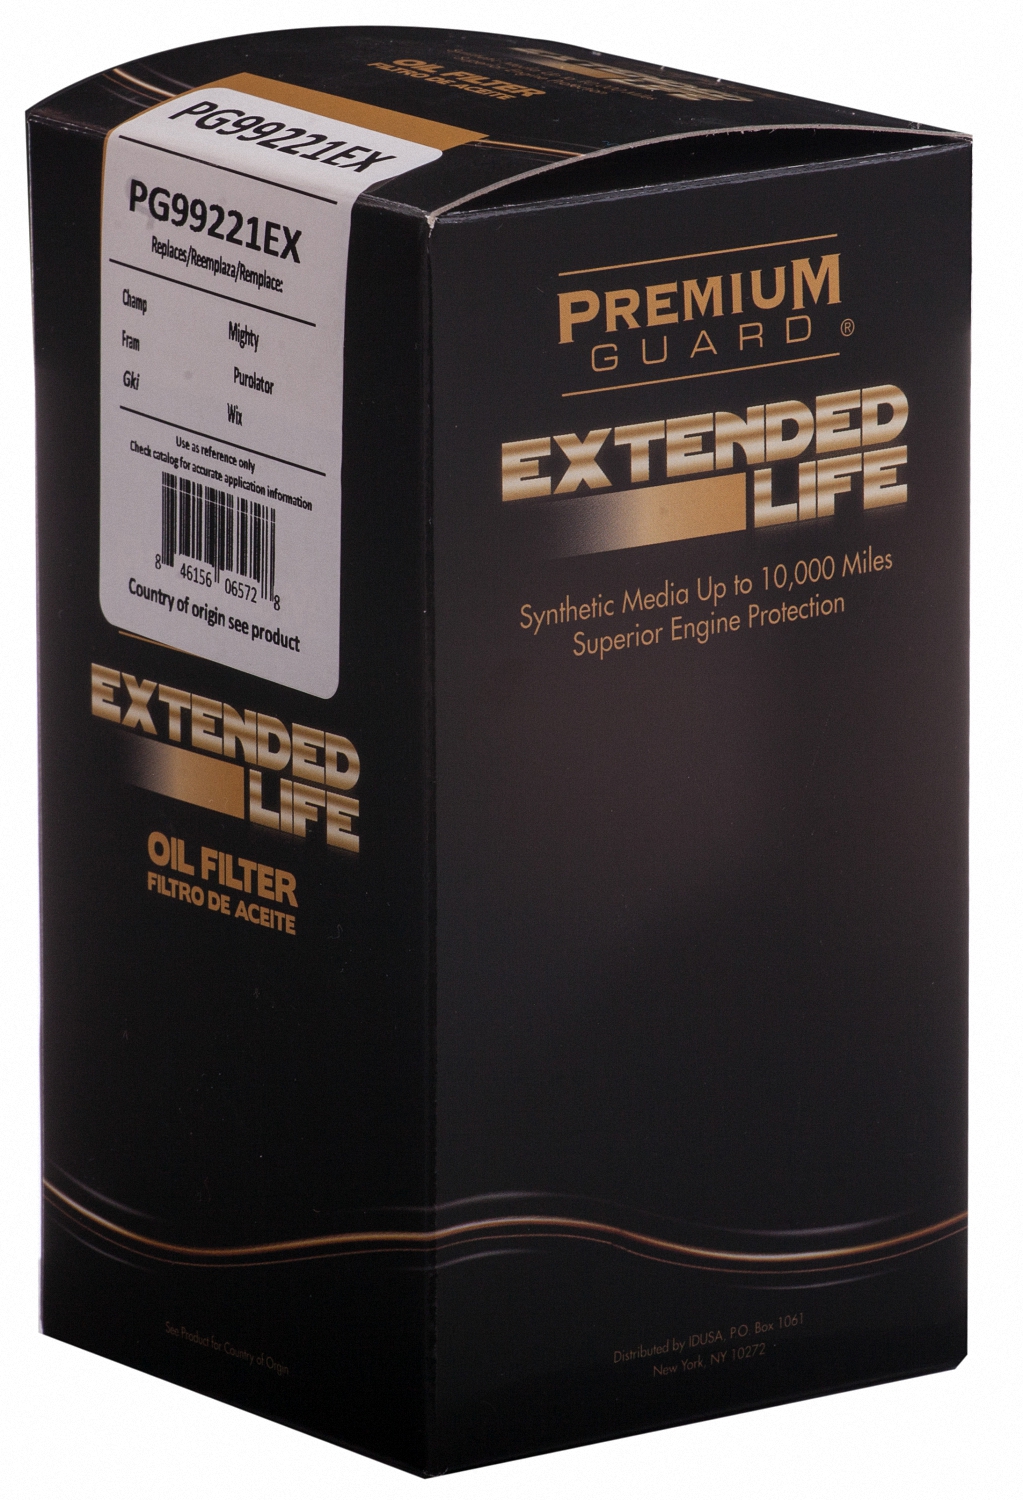 Premium PG99221EX Extended Life Oil Filter - image 2 of 6